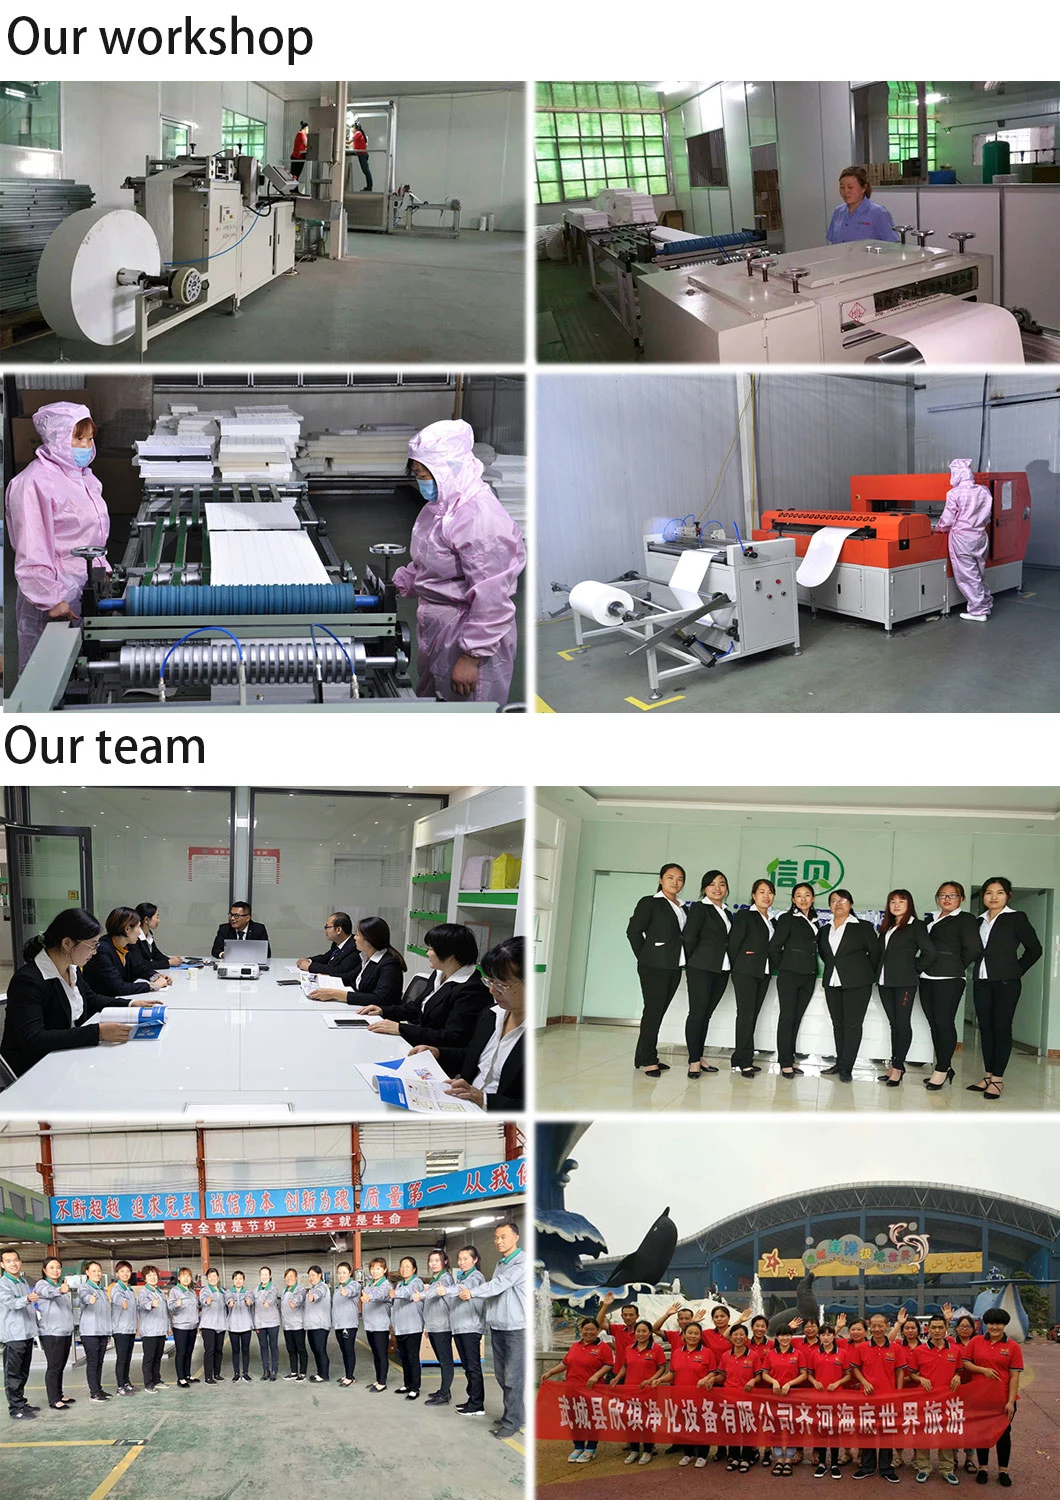 for Central Air Conditioning Ventilation System, Pharmaceutical, Hospital Bag Air Filter F6